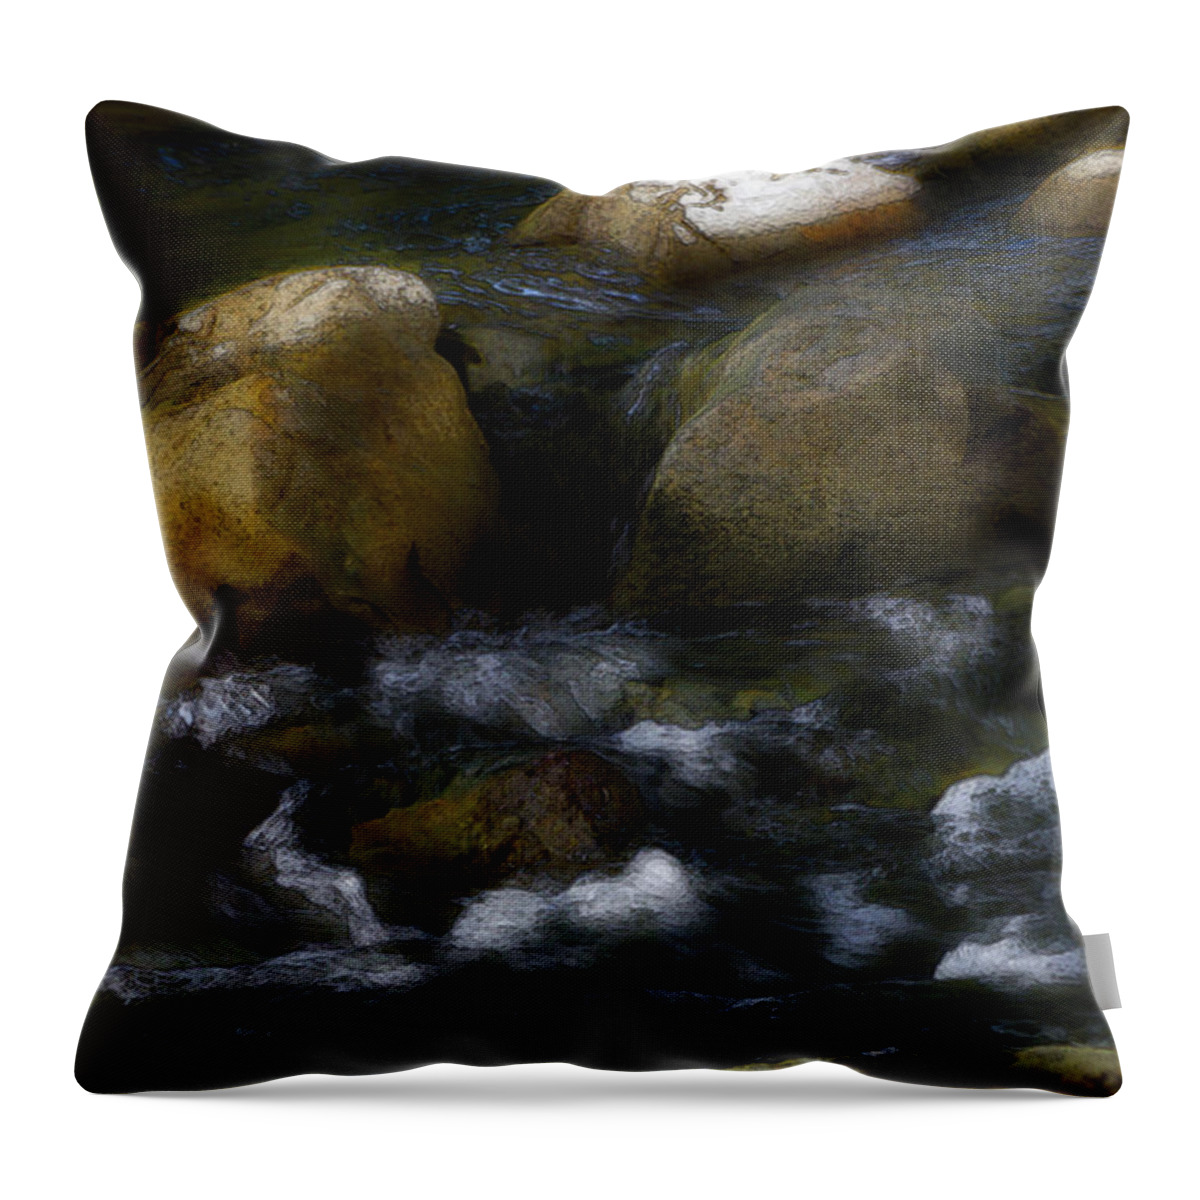 Rocks Throw Pillow featuring the photograph Rocks and Water by Karen W Meyer